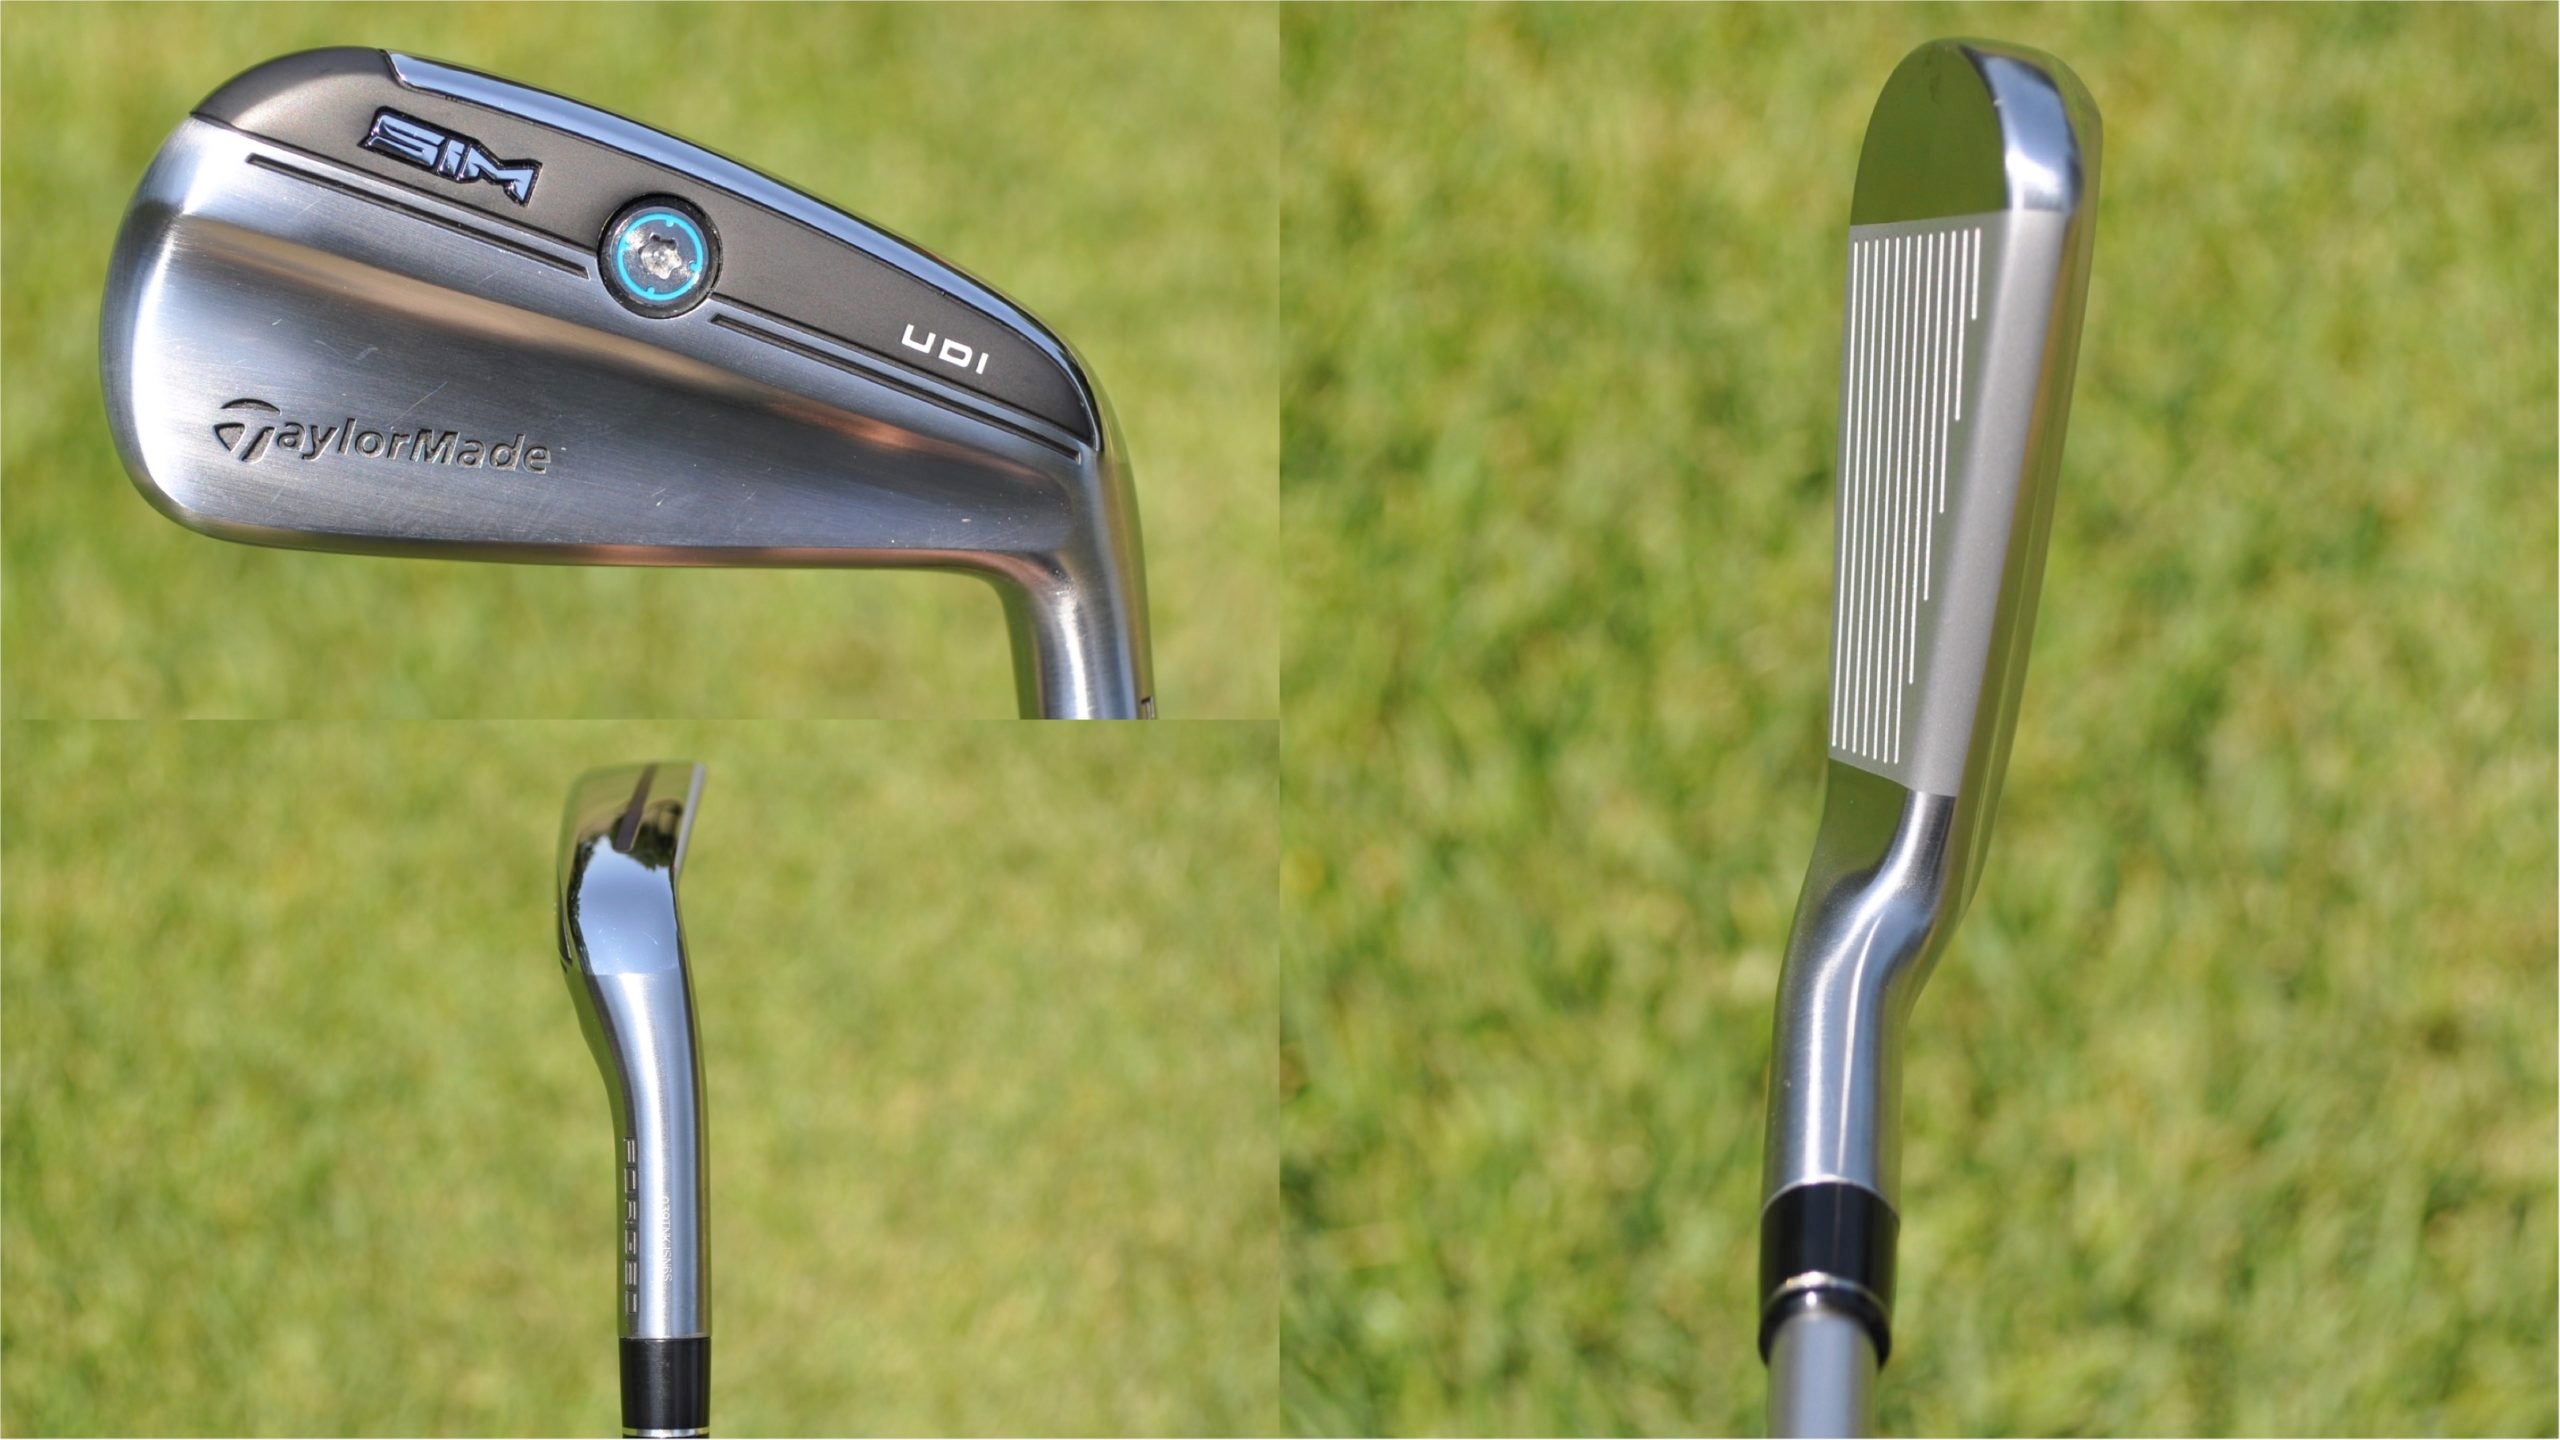 FIRST LOOK: TaylorMade's new SIM UDI and SIM DHY utility irons